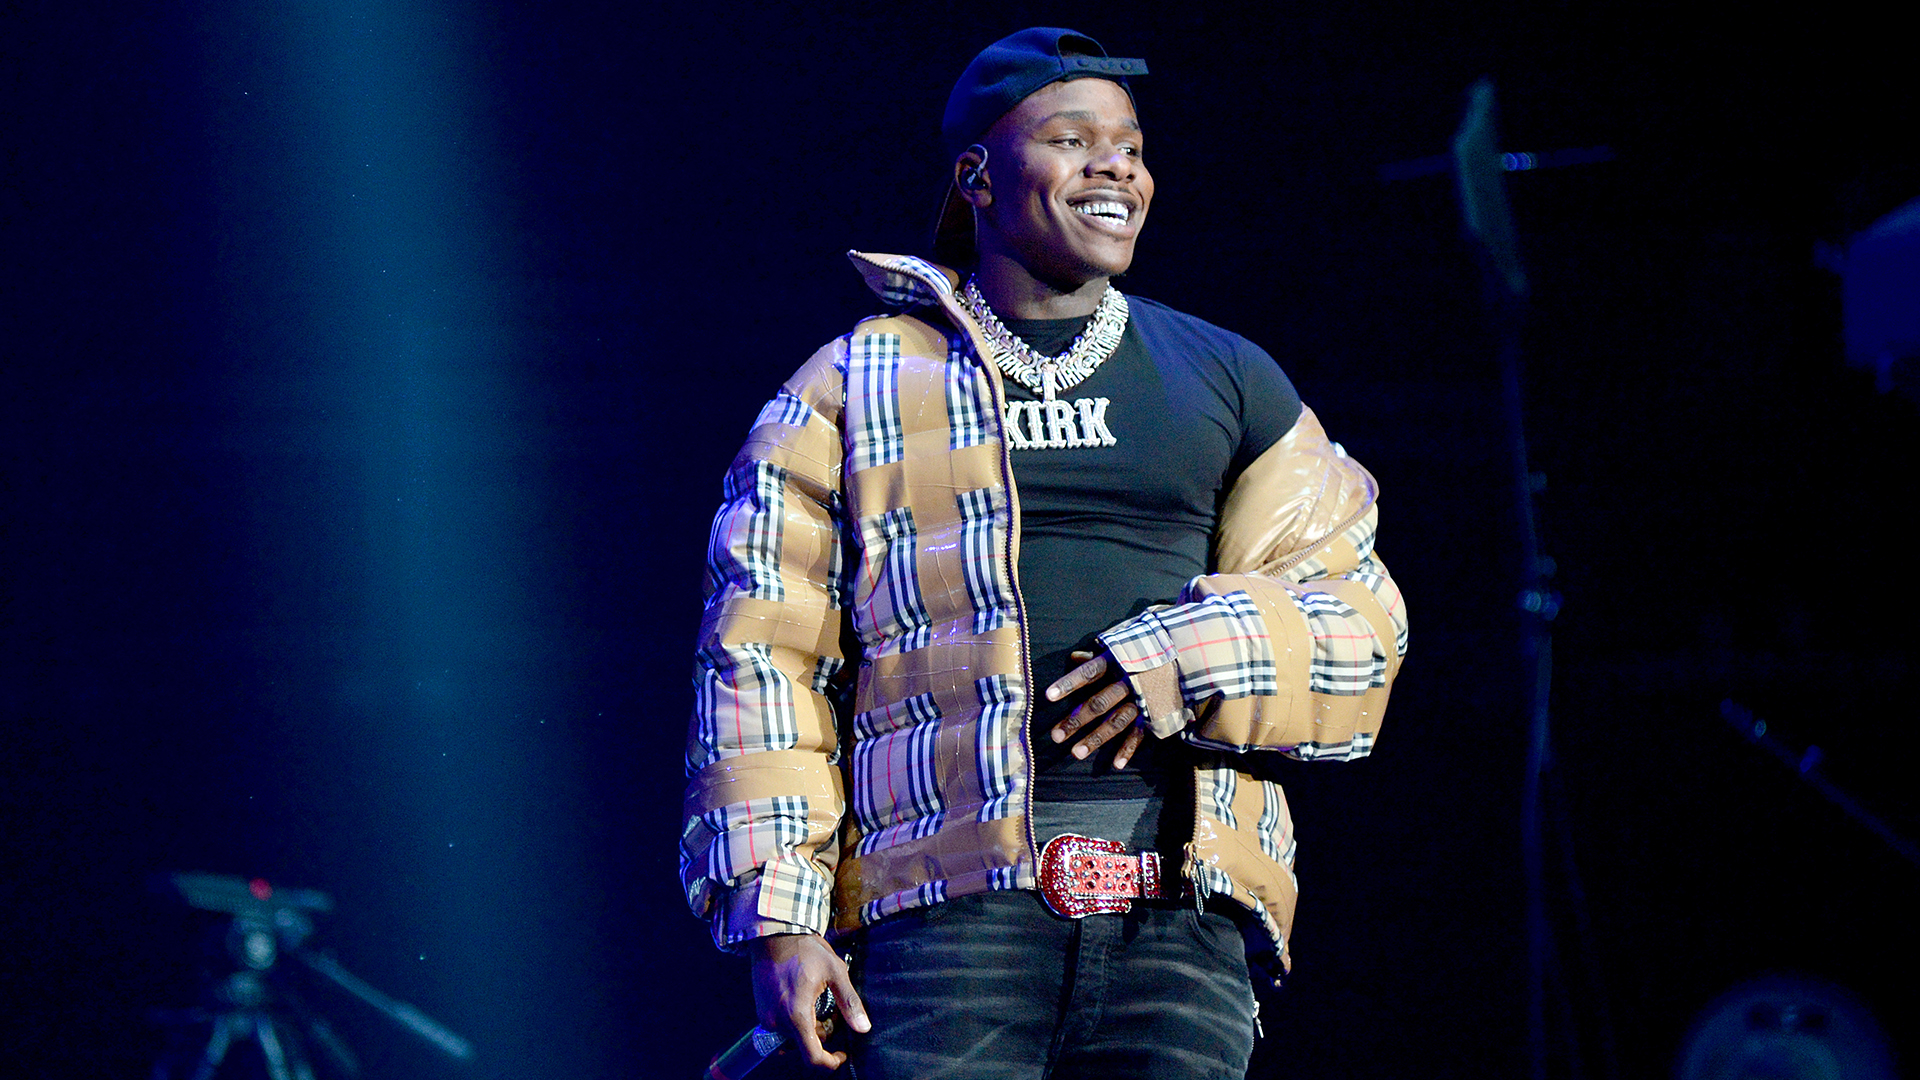 DaBaby Net Worth 2021: Cash, Cars, And Hit Songs